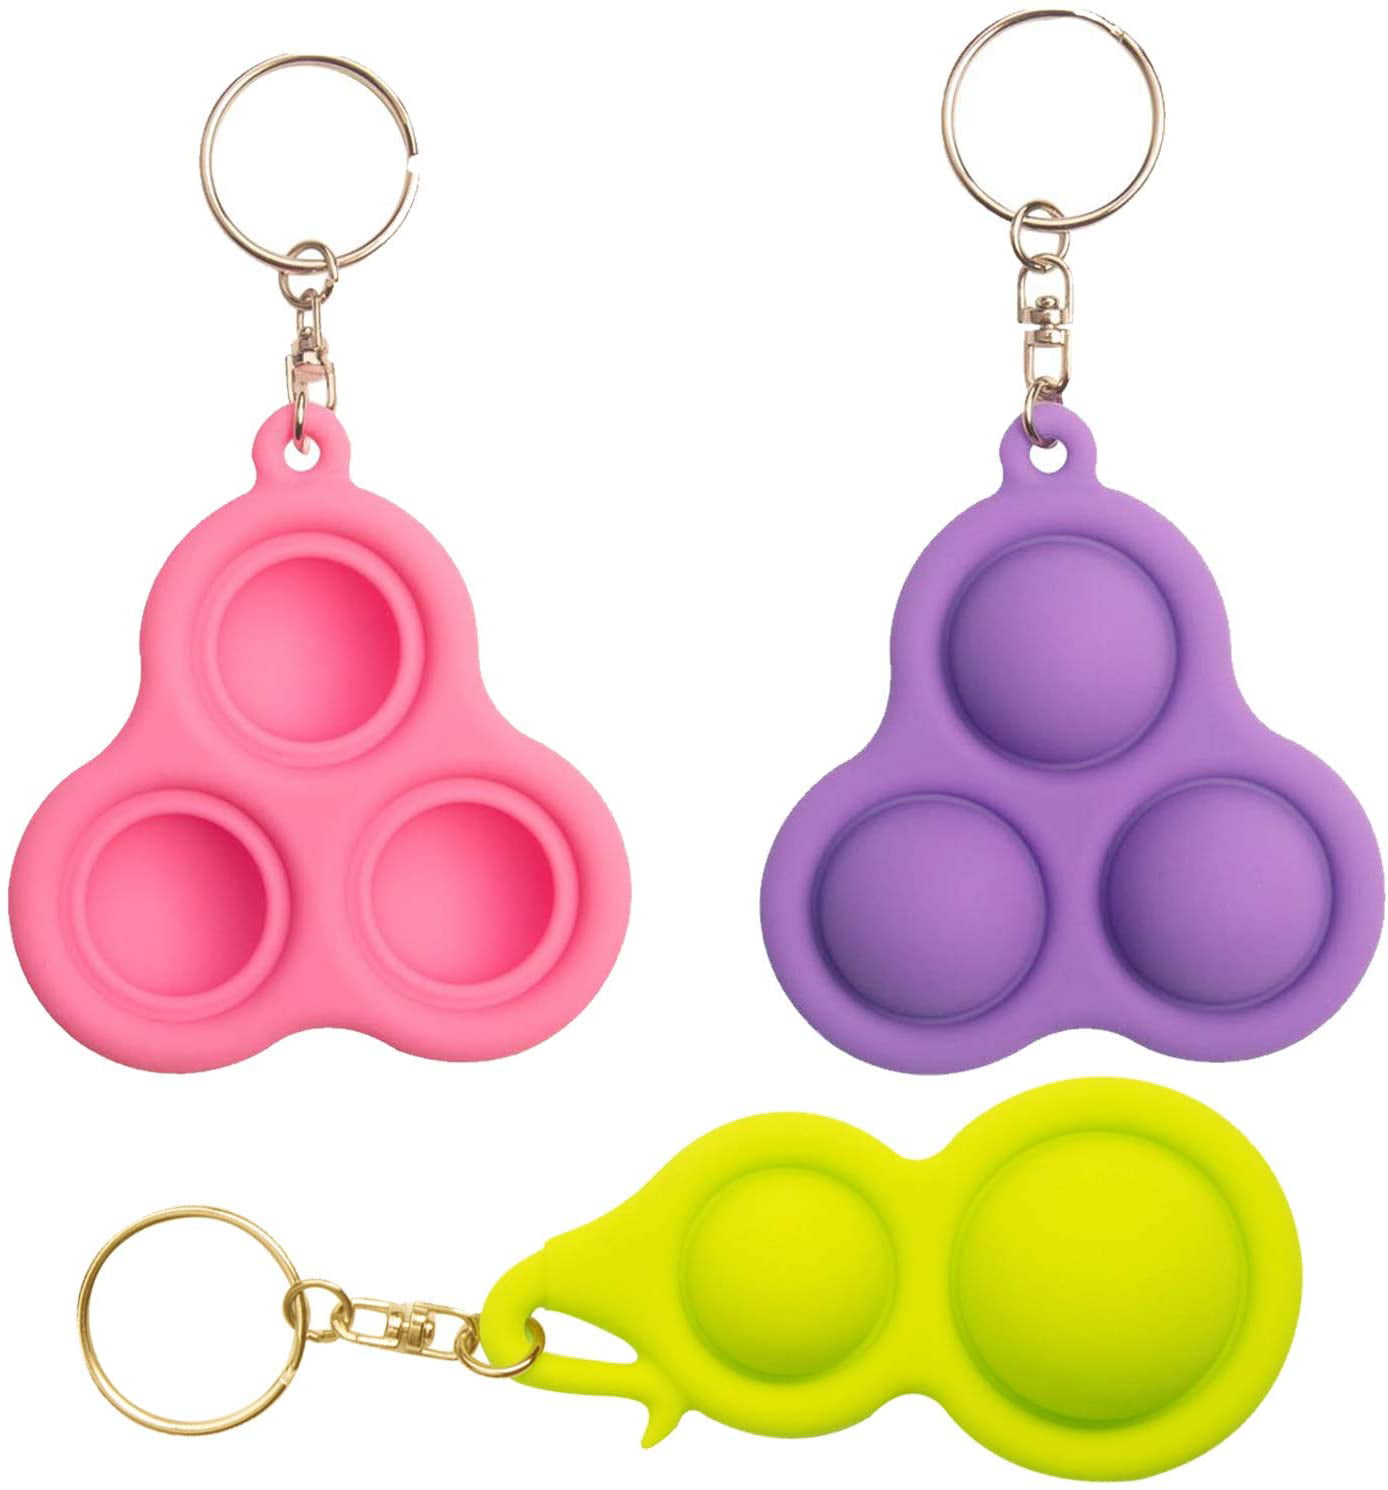 Octopus BE 2Pcs Fidget Simple Dimple Toy Silicone Sensory Fidget Decompression Toy Stress Relief Hand Toys with Keychain for Kids Adults Anti-Anxiety Squeeze Game 